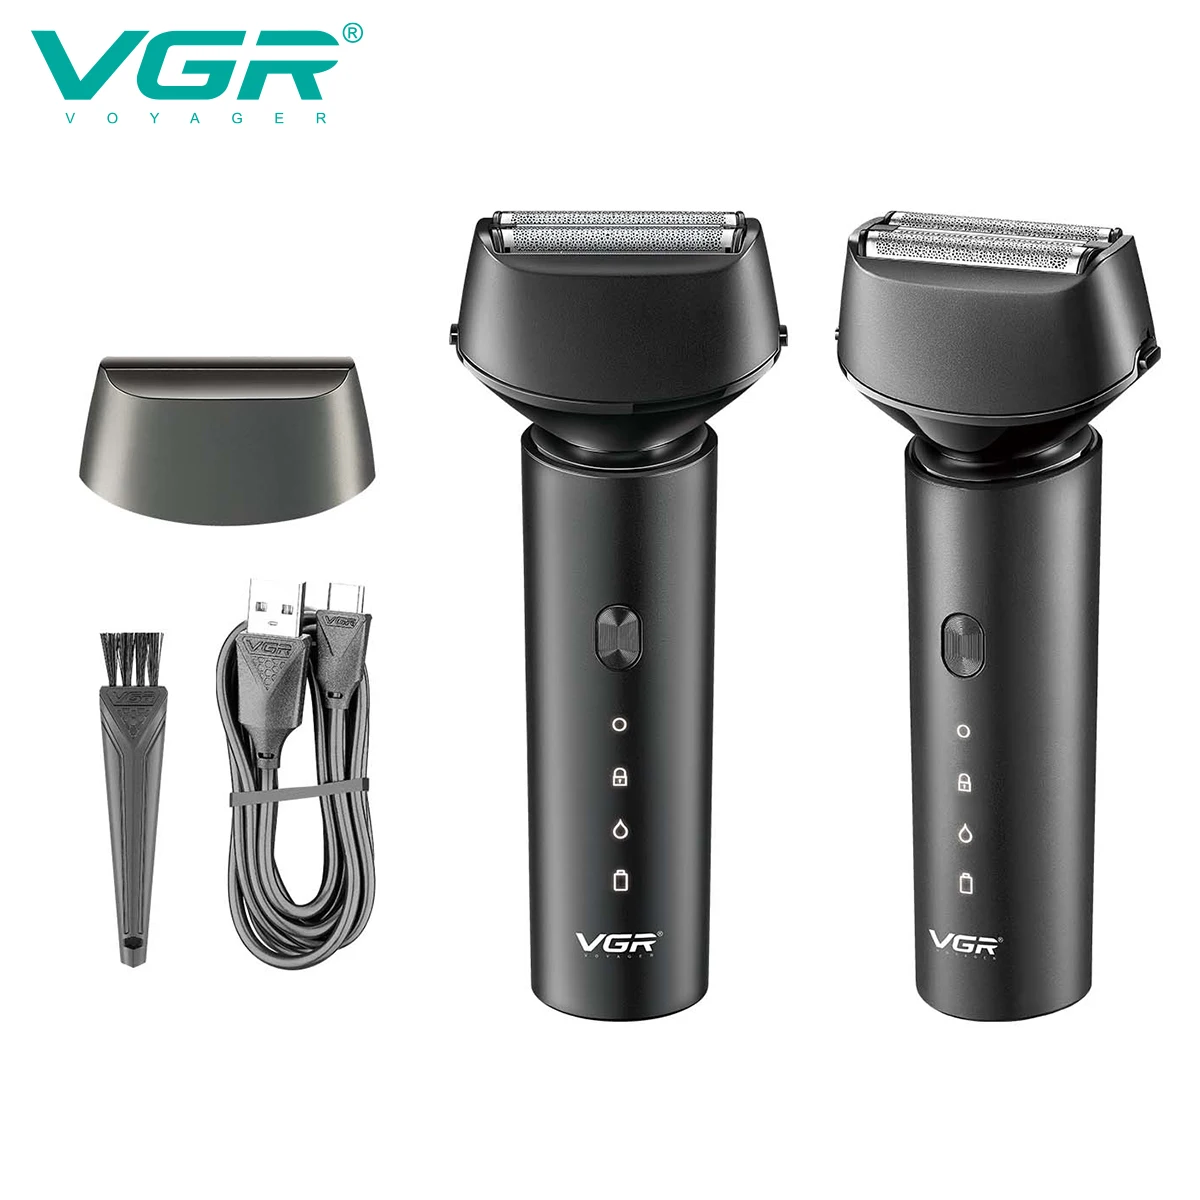 

VGR Hair Trimmer Professional Beard Shaver Electric Hair Cutting Machine IPX7 Waterproof Rechargeable Trimmer for Men V-380